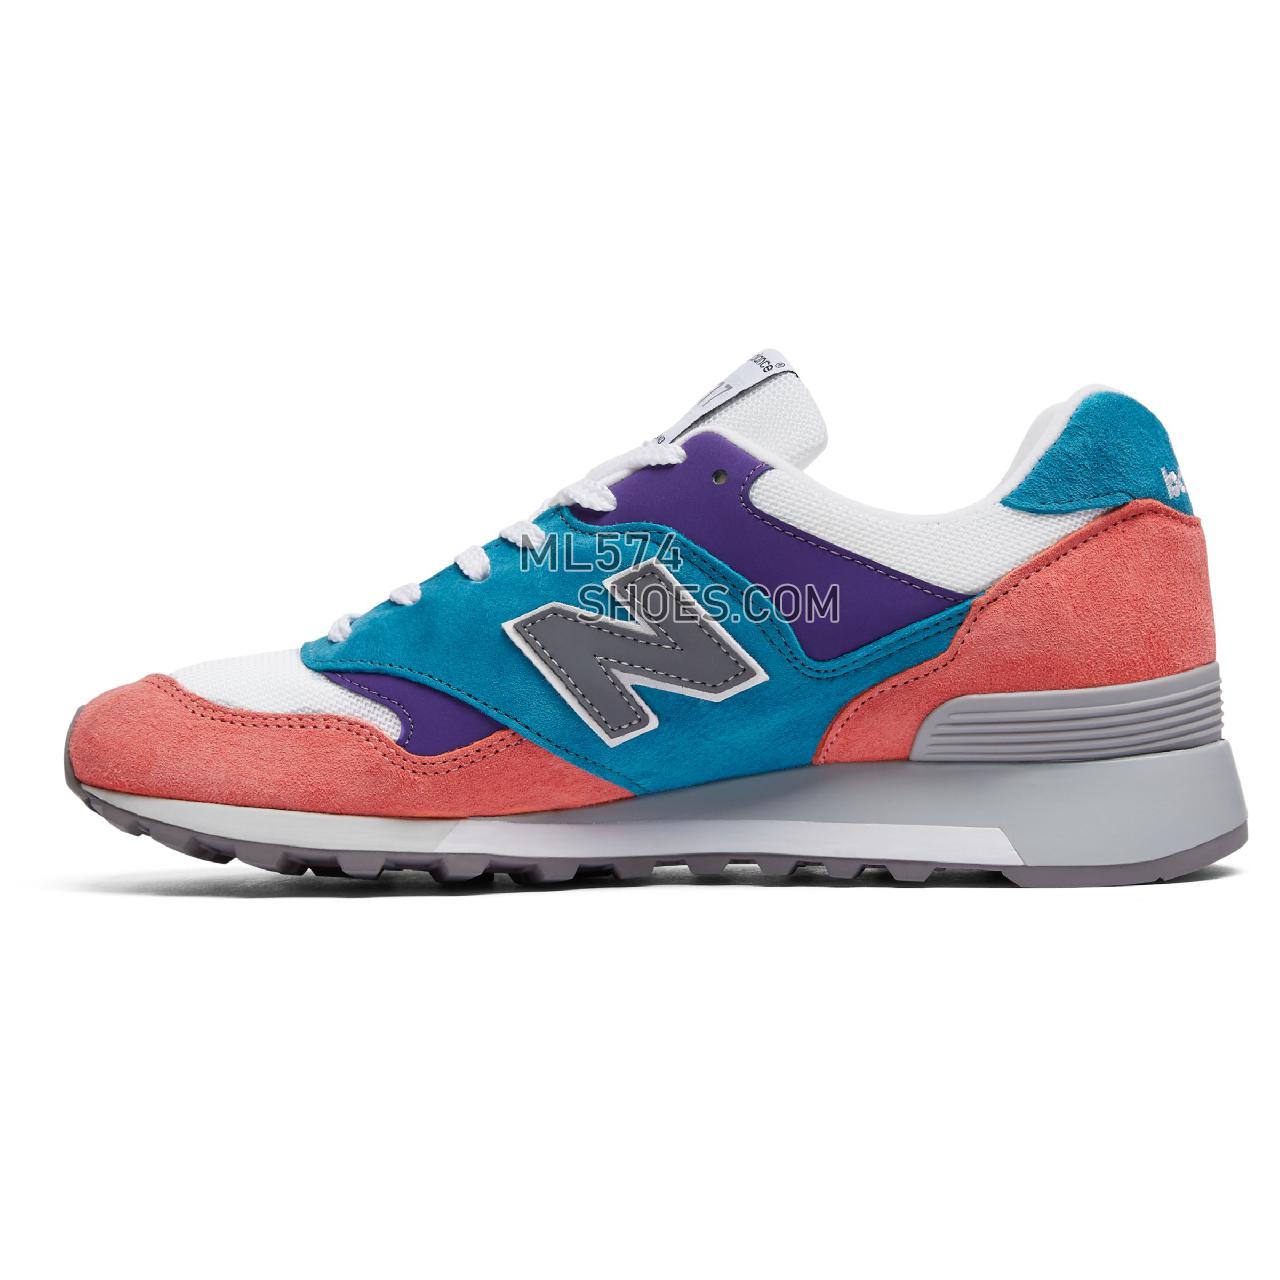 New Balance MADE in UK 577 - Men's Made in USA And UK Sneakers - Pink with teal and purple - M577GPT